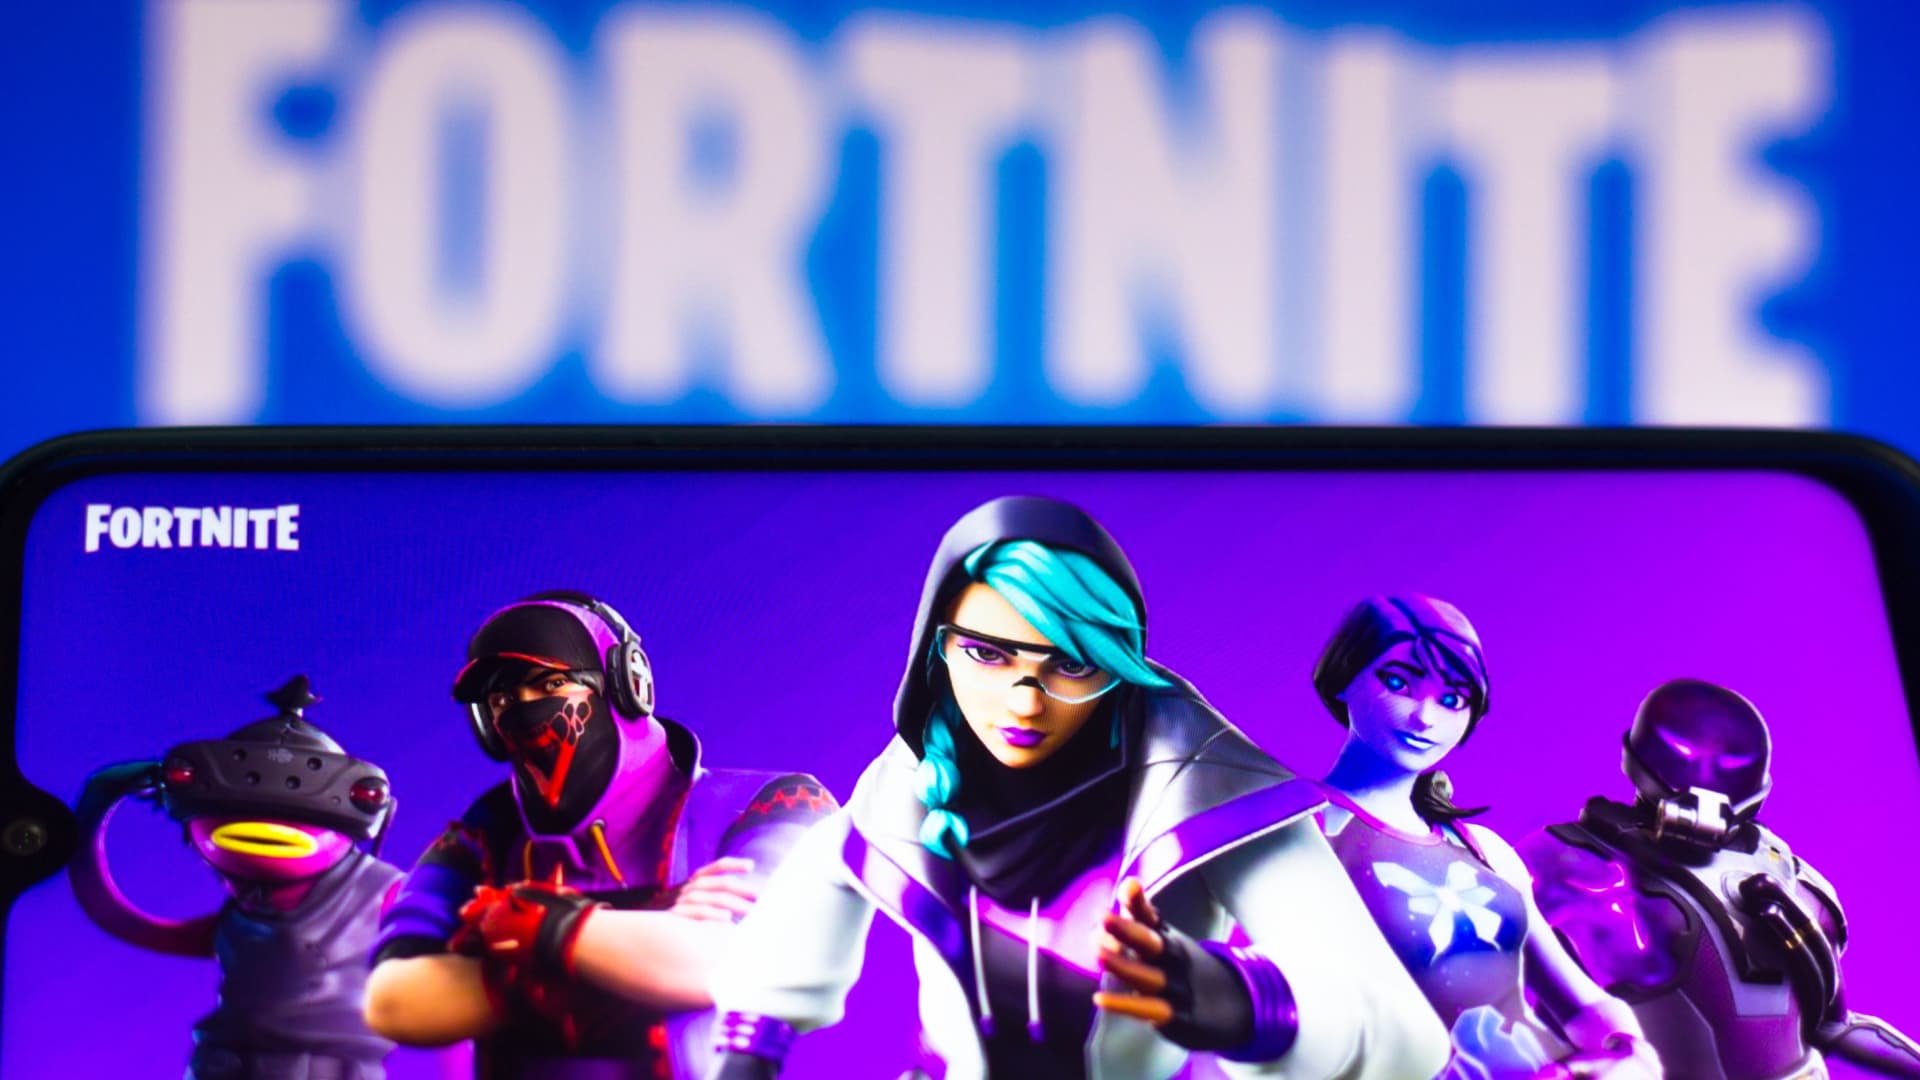 How to get a refund if your kids bought gear in Fortnite without asking you